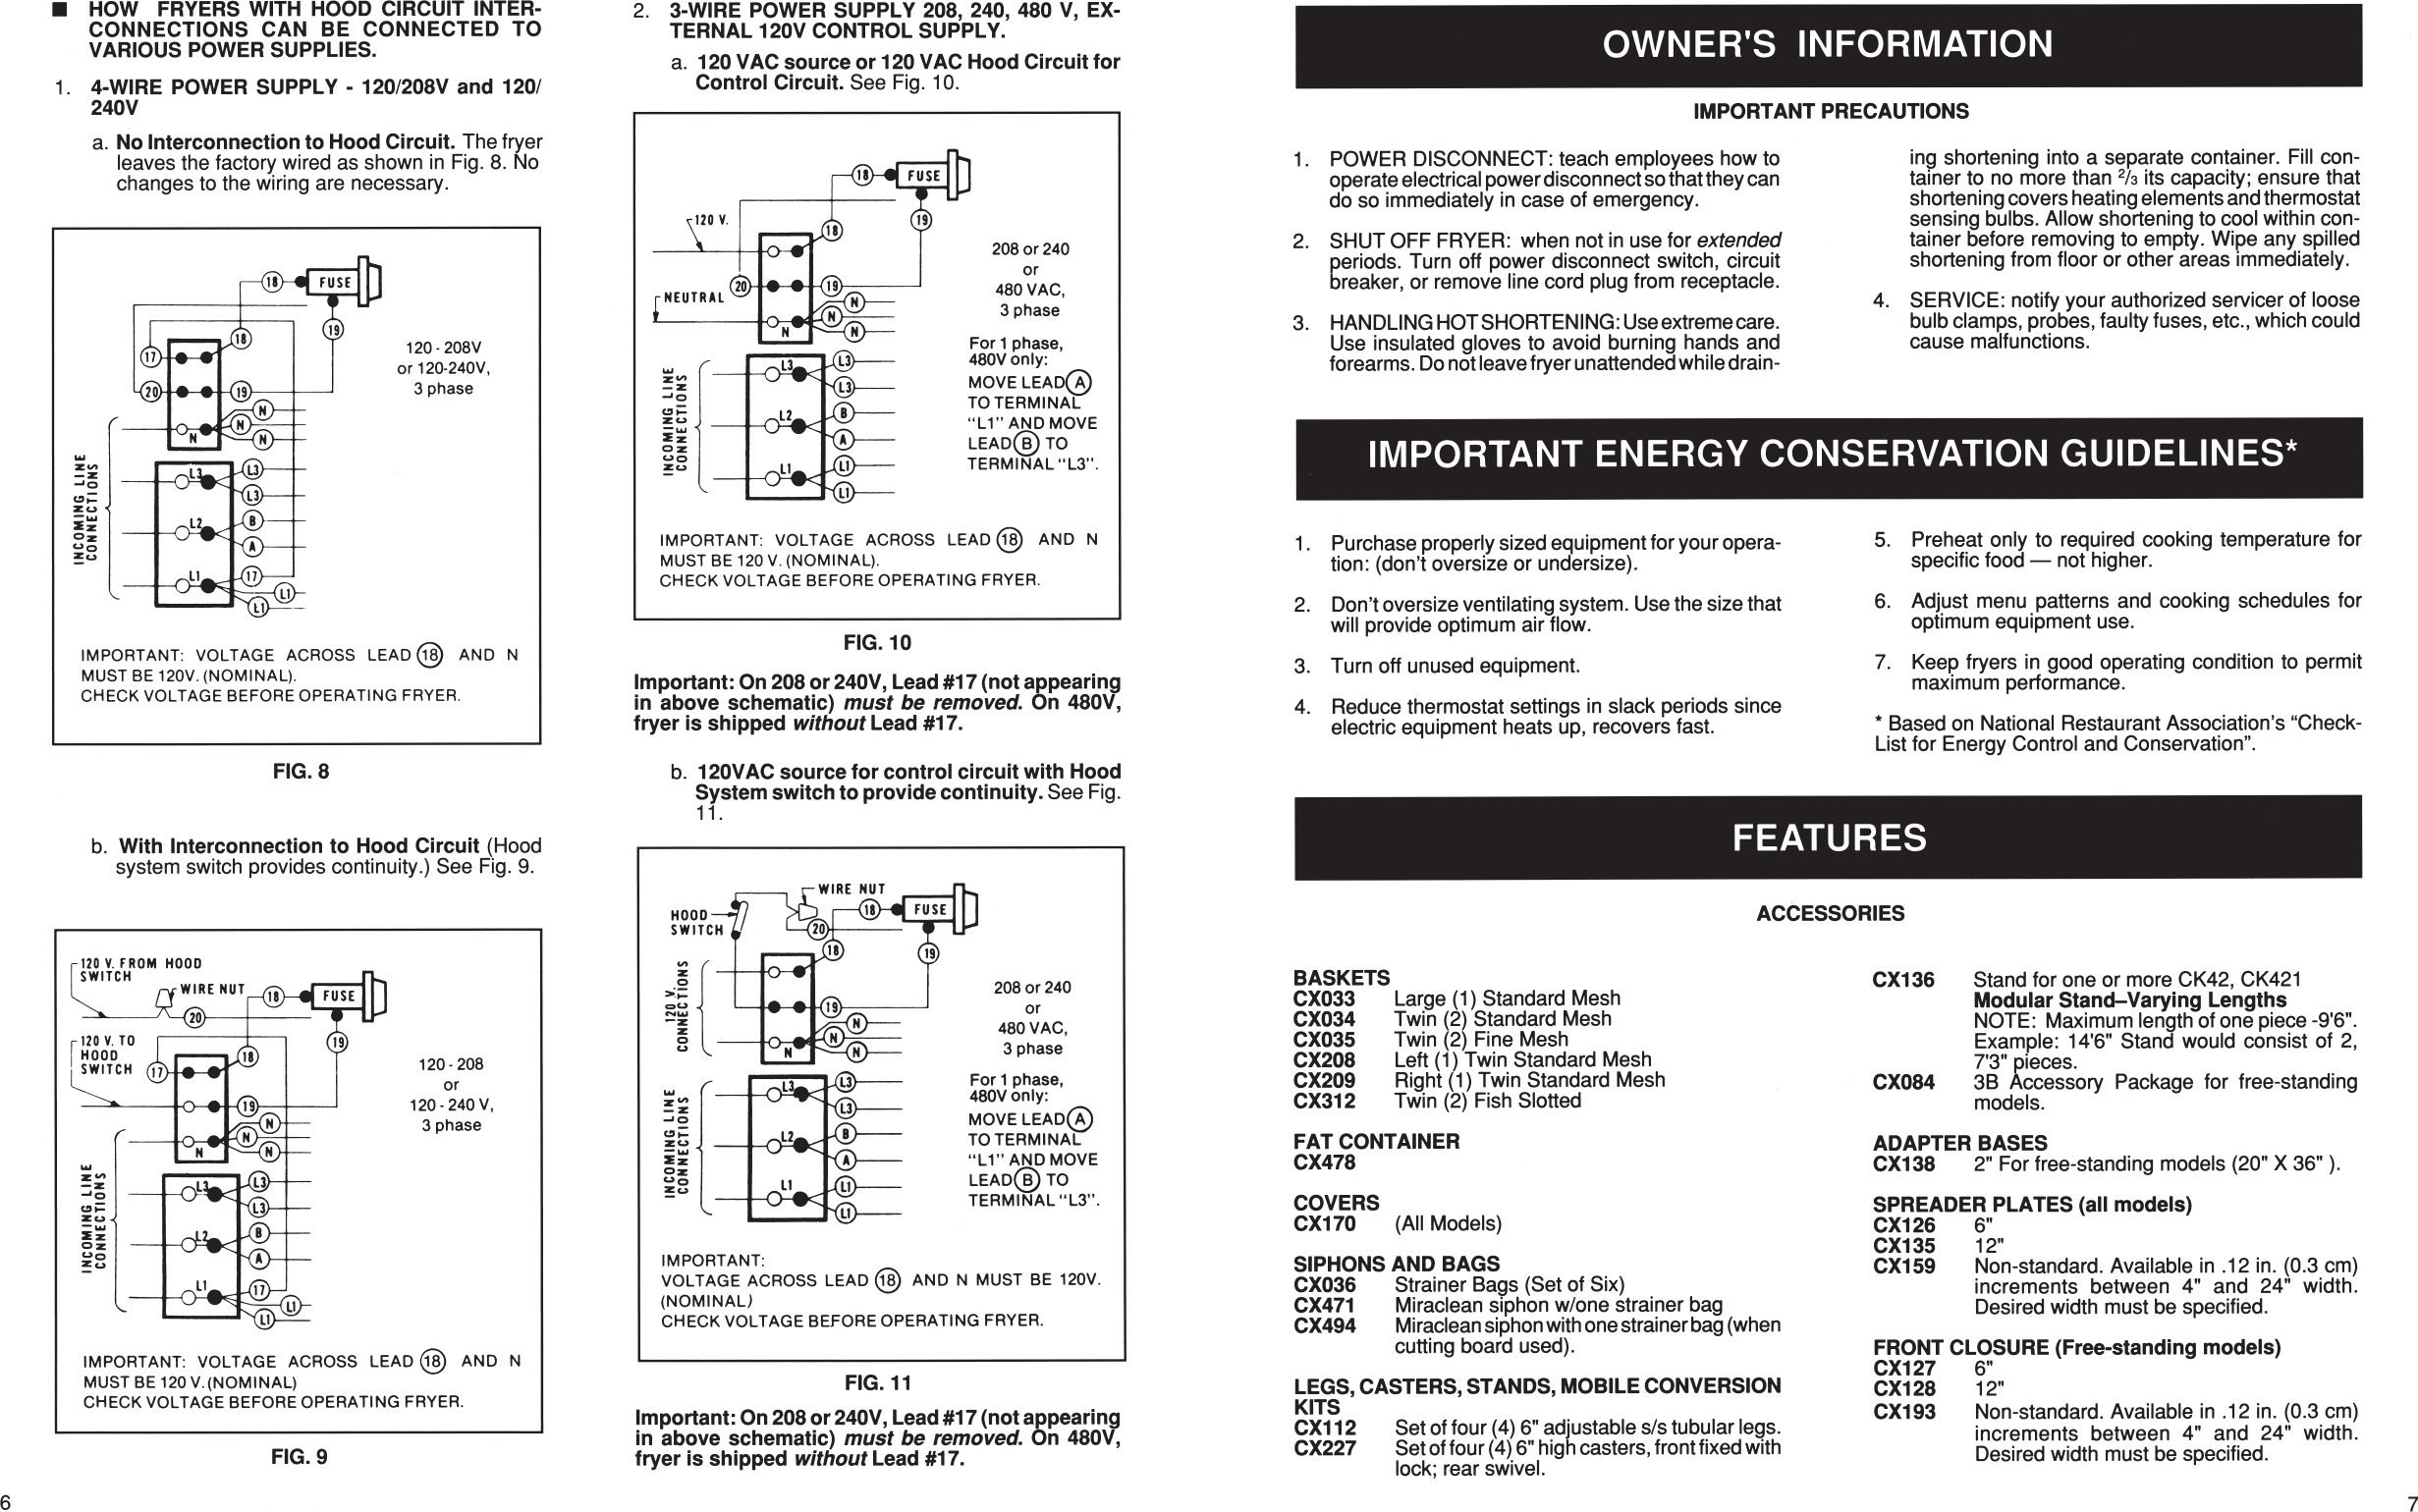 Page 6 of 12 - Hobart Hobart-Corp-Fryer-Ck40-Users-Manual- F27400  Hobart-corp-fryer-ck40-users-manual